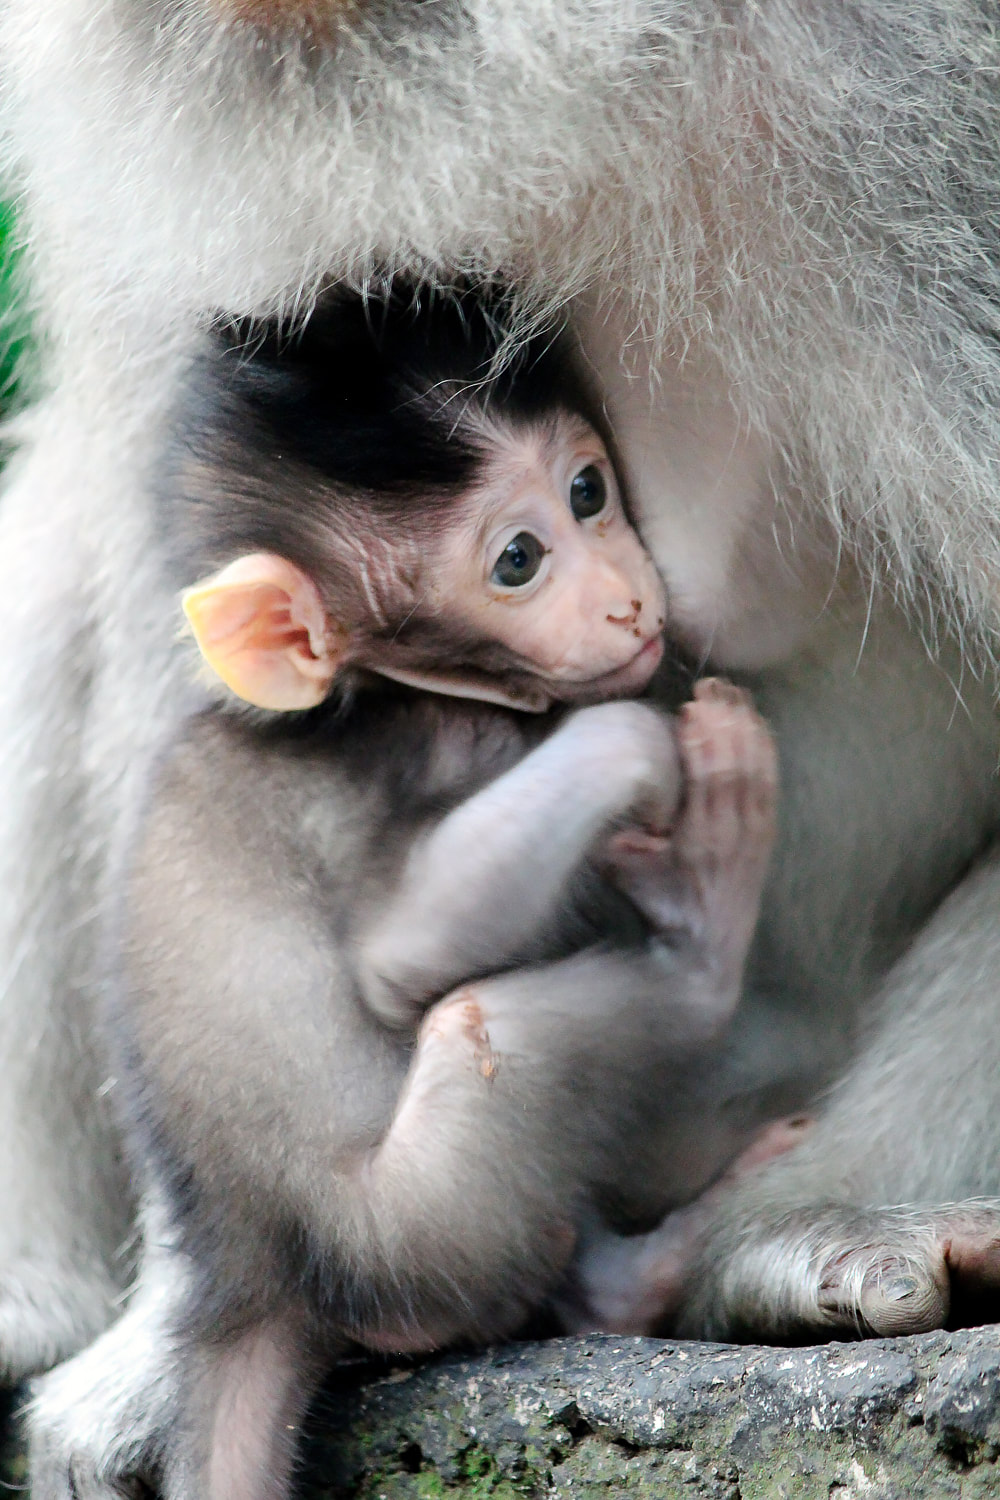 A baby Grey-haired, long-tail, macaque holding on to its mother. Sacred Monkey Forest Sanctuary, Ubud, Bali, Indonesia.